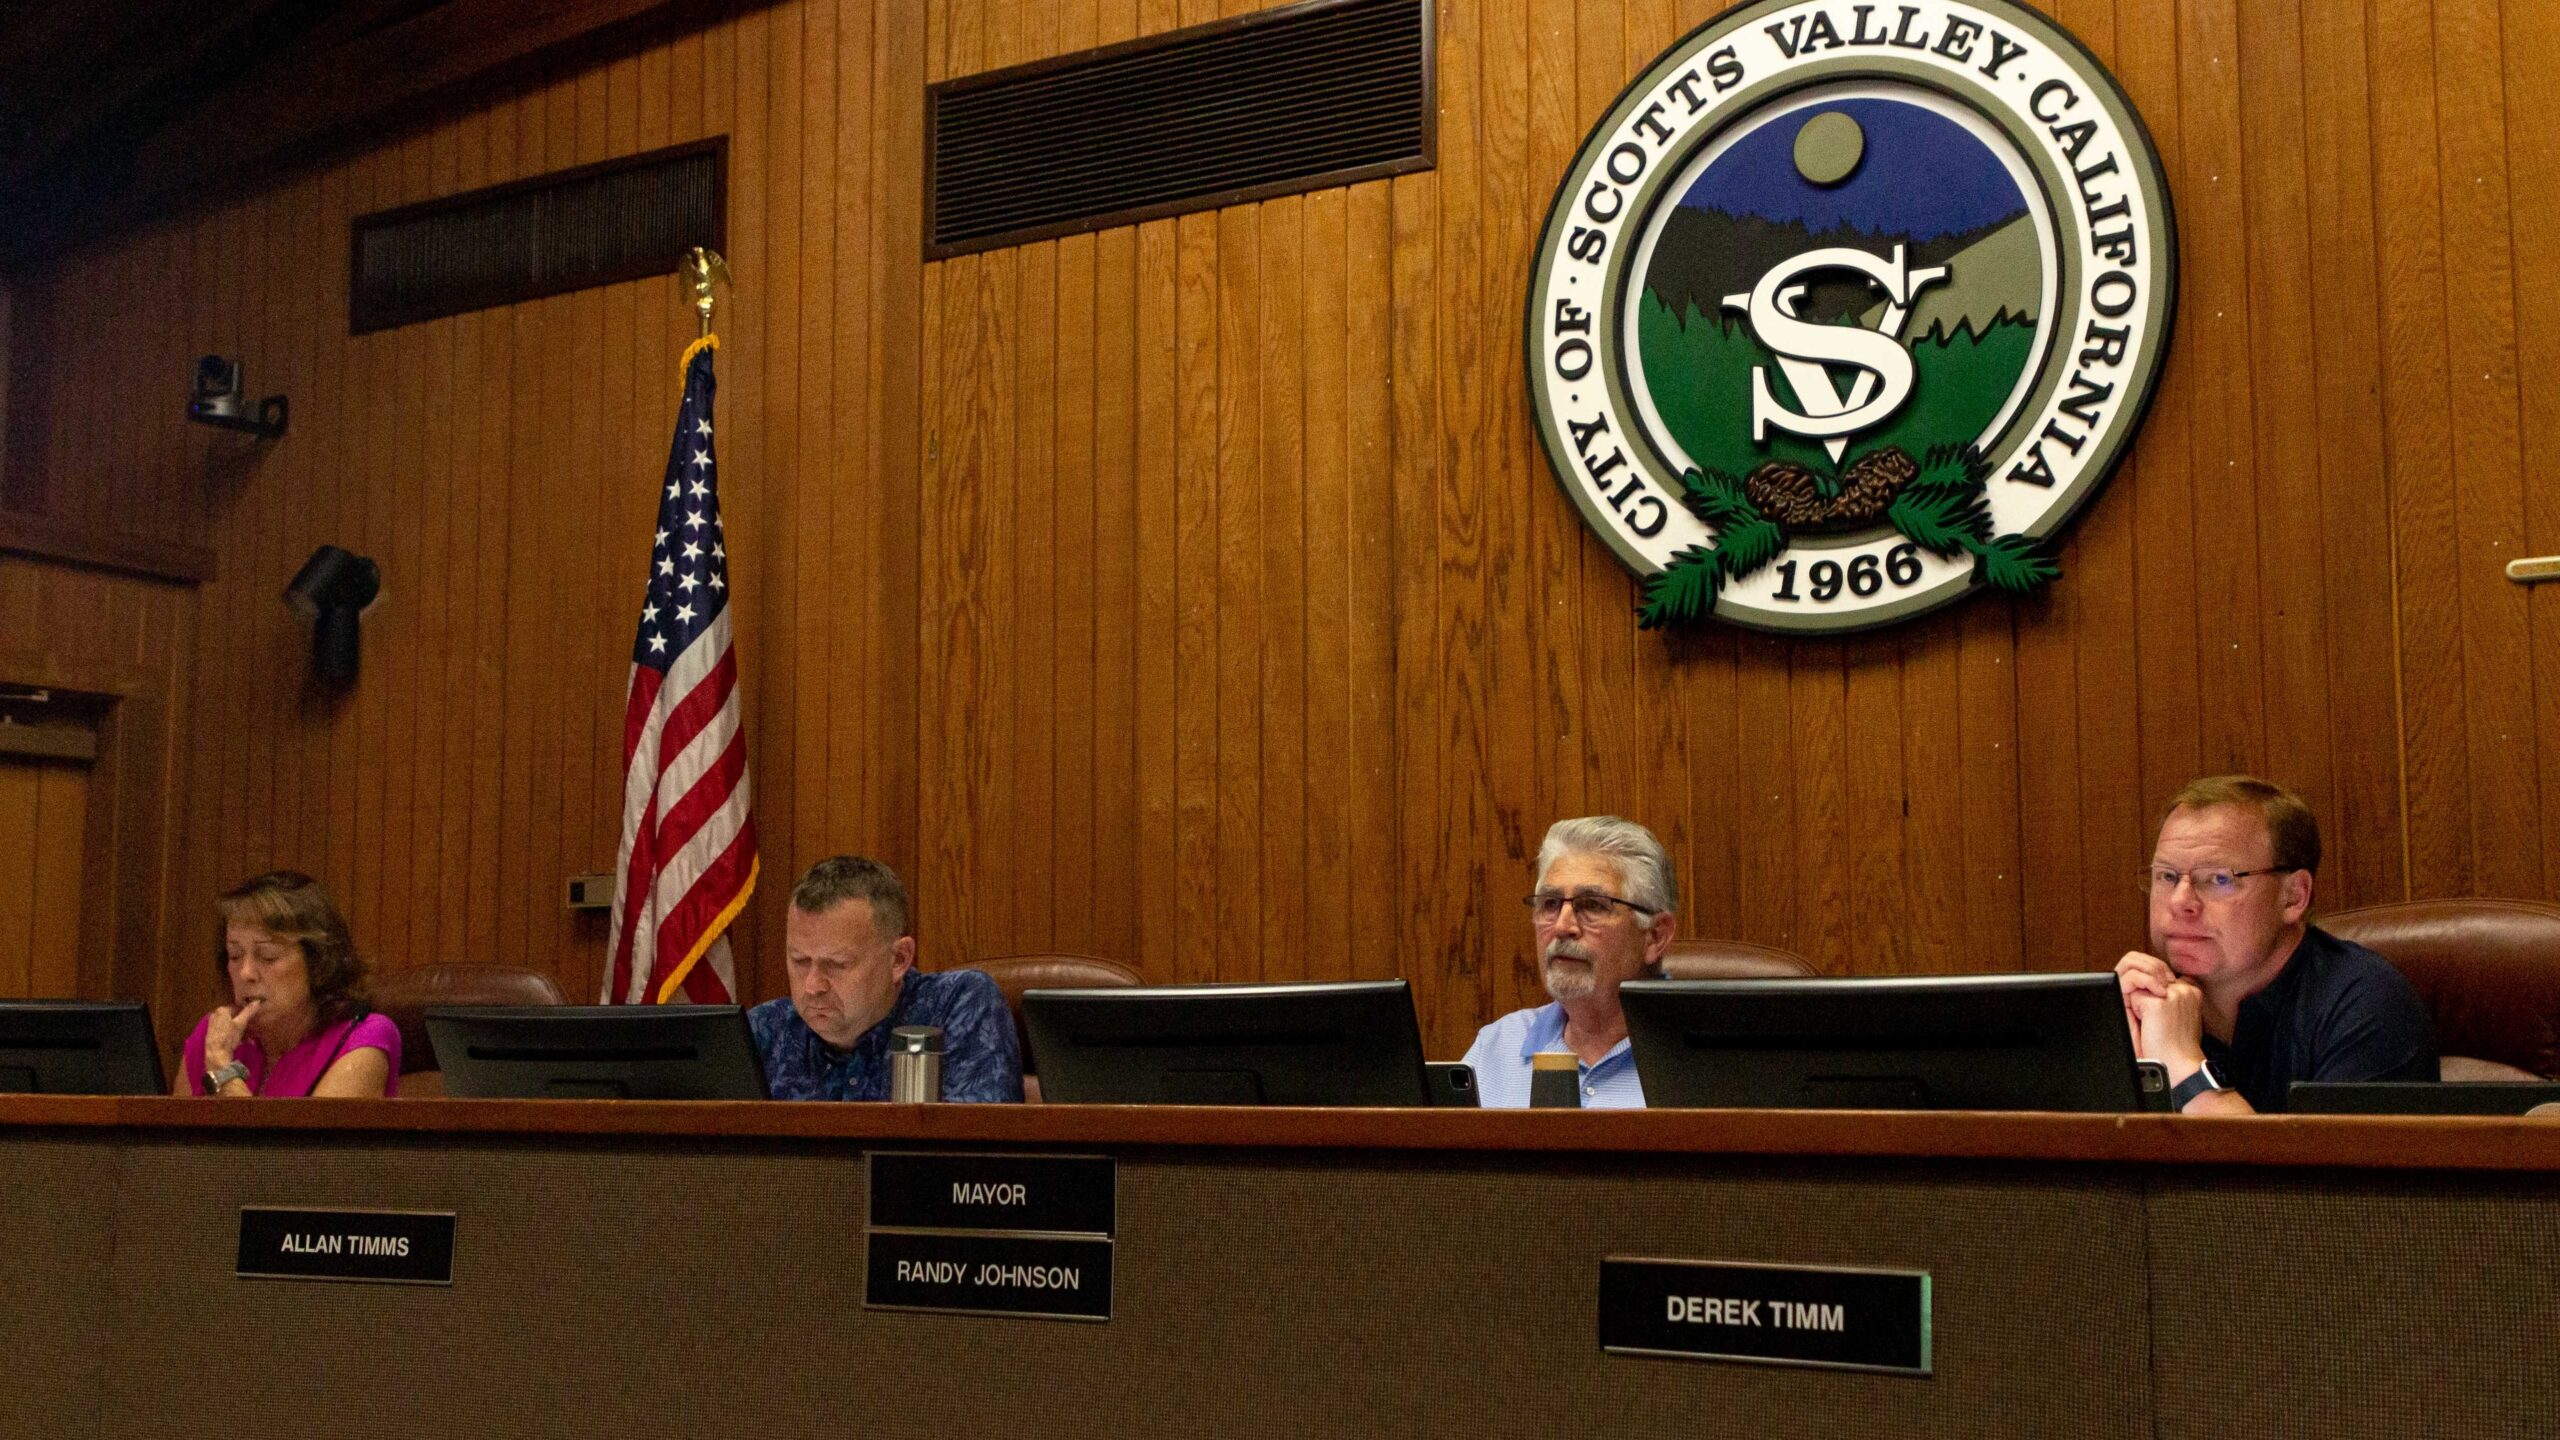 A photo of four Scotts Valley city council members sitting at the dais. Behind them are a city emblem on the wall and an American flag.